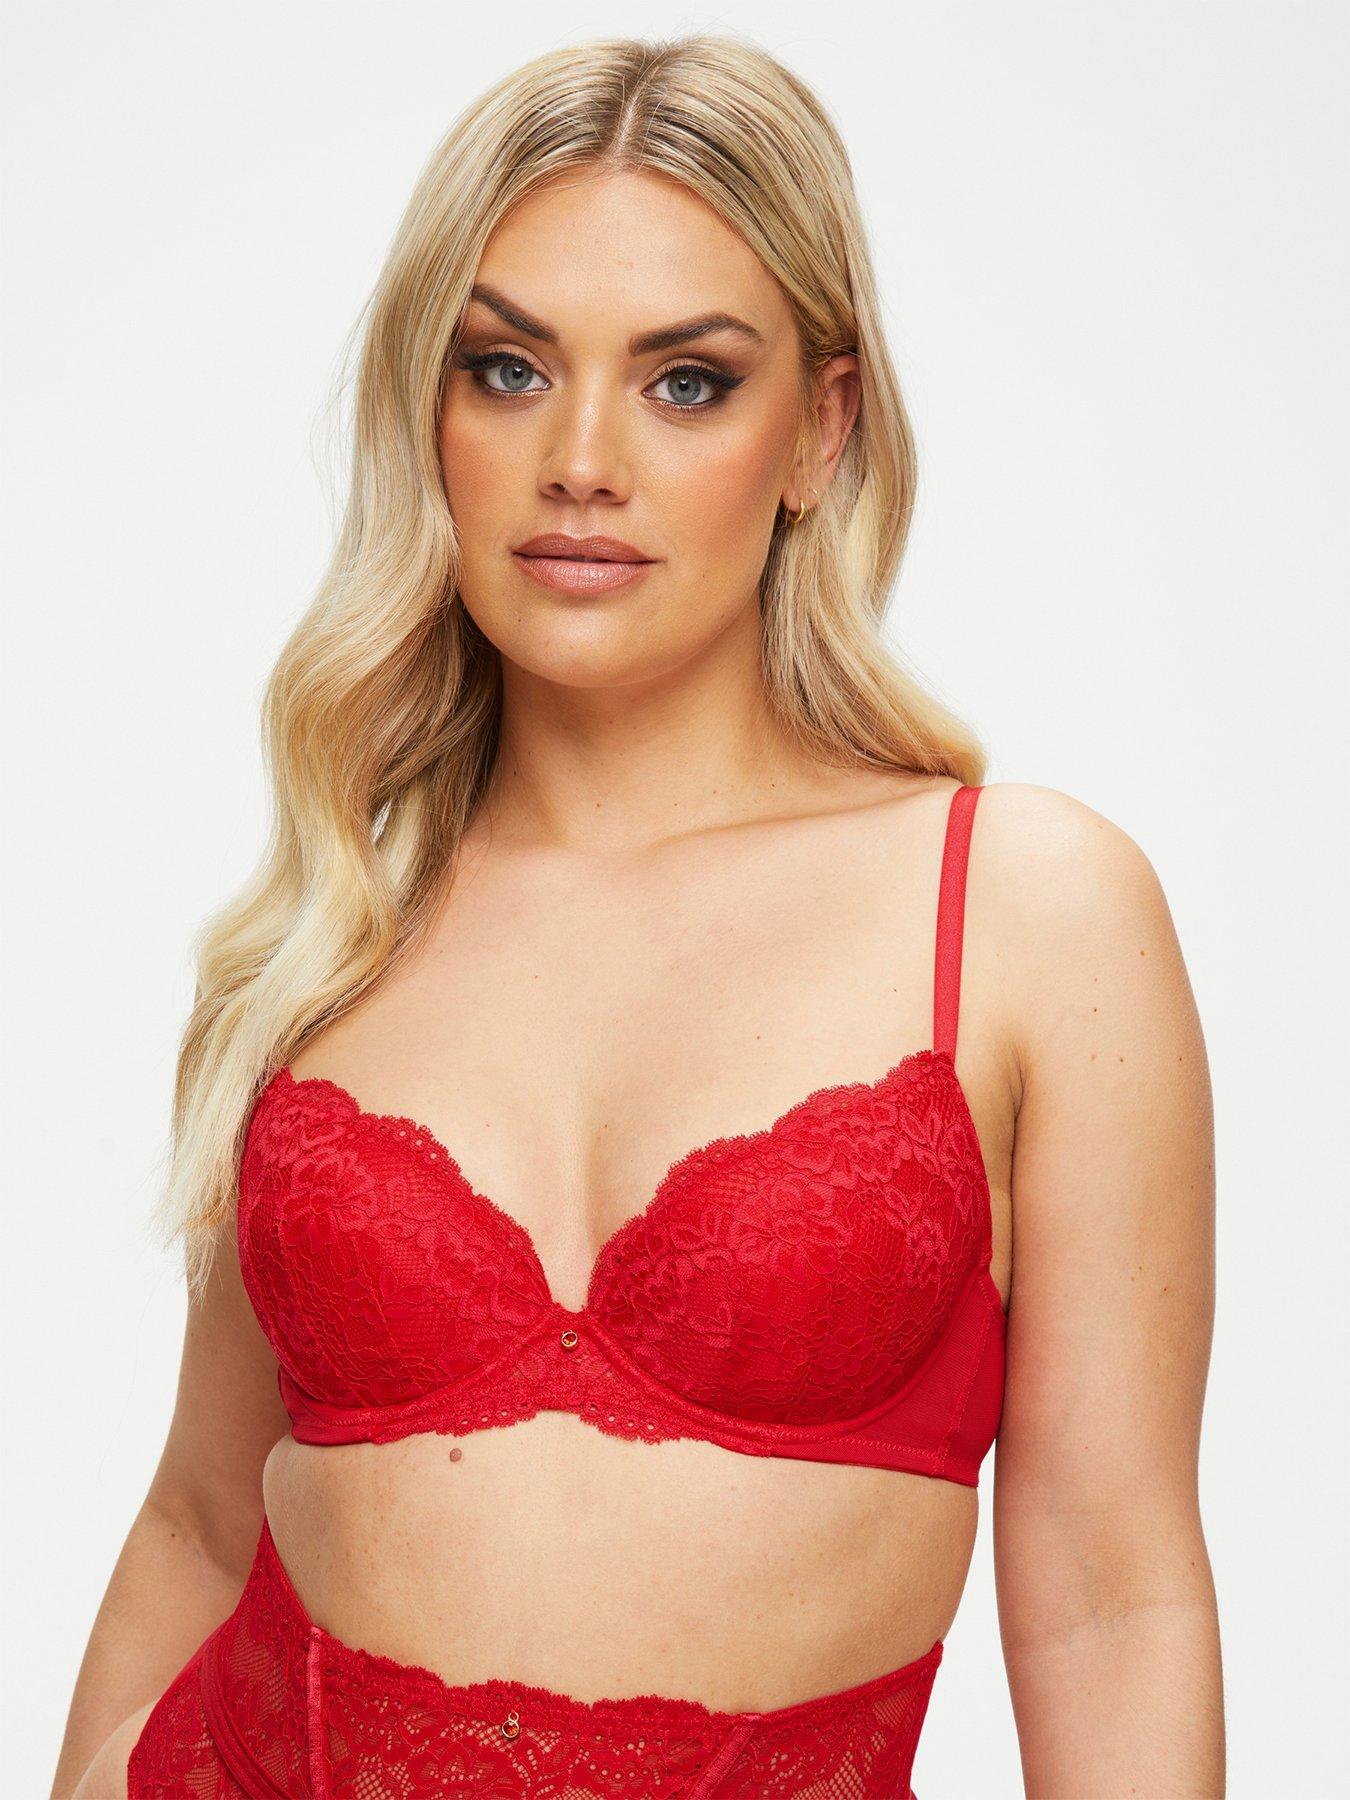 https://media.littlewoods.com/i/littlewoods/U6N7E_SQ1_0000002882_BRIGHT_RED_MDf/ann-summers-sexy-lace-planet-plunge-red.jpg?$180x240_retinamobilex2$